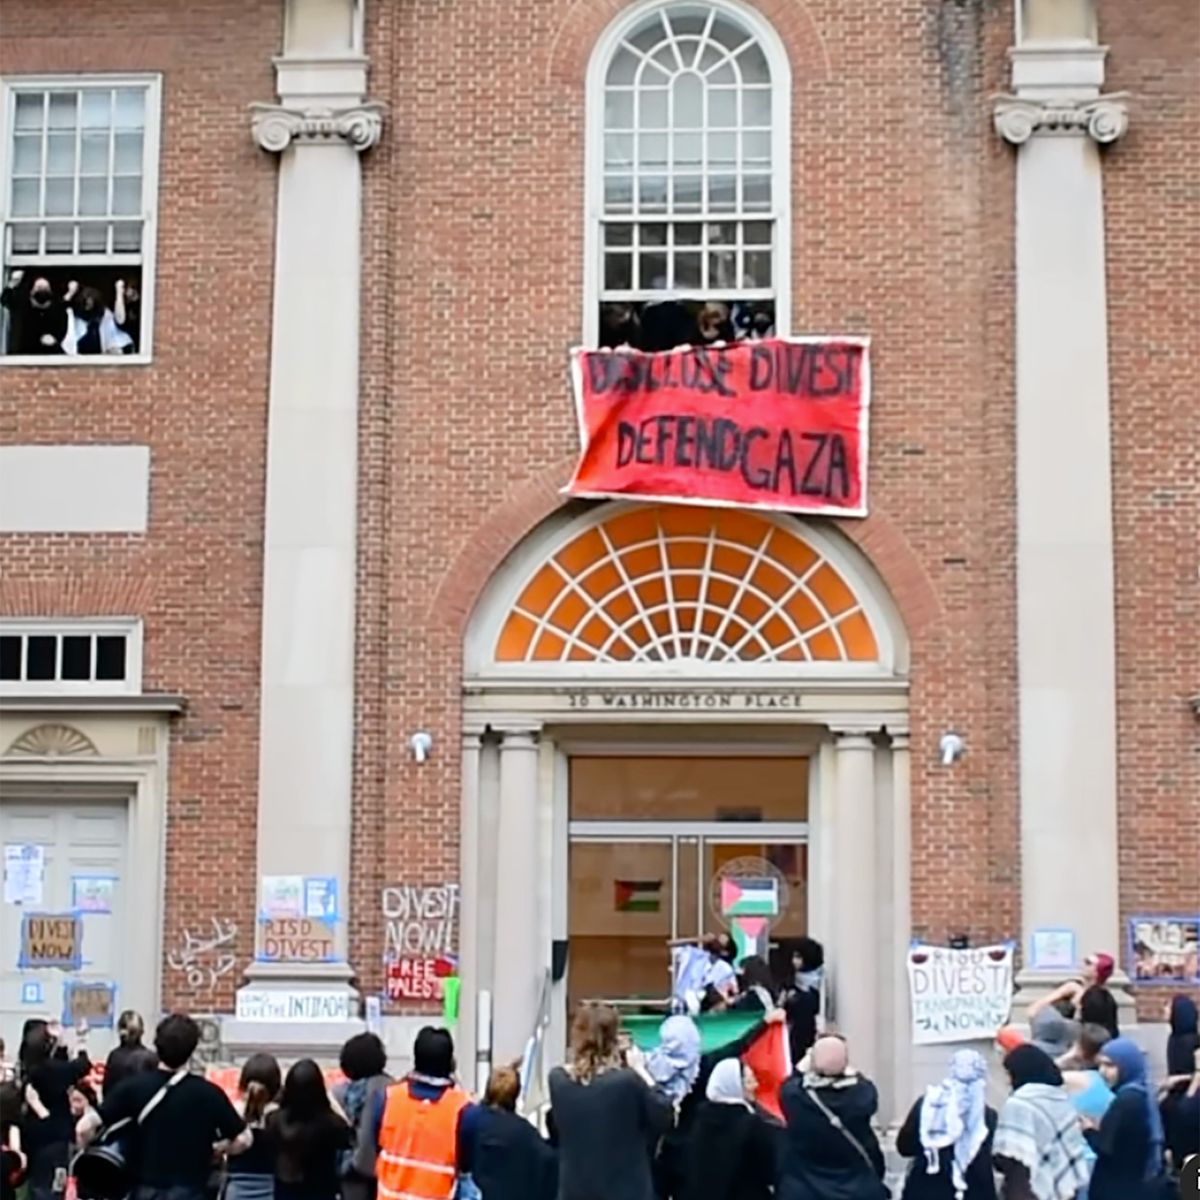 Memebers of RISD Students for Justice in Palestine and their supporters rally outside 20 Washington Place, a Rhode Island School of Design building currently occupied by protesters RISD Students for Justice in Palestine, via Instagram